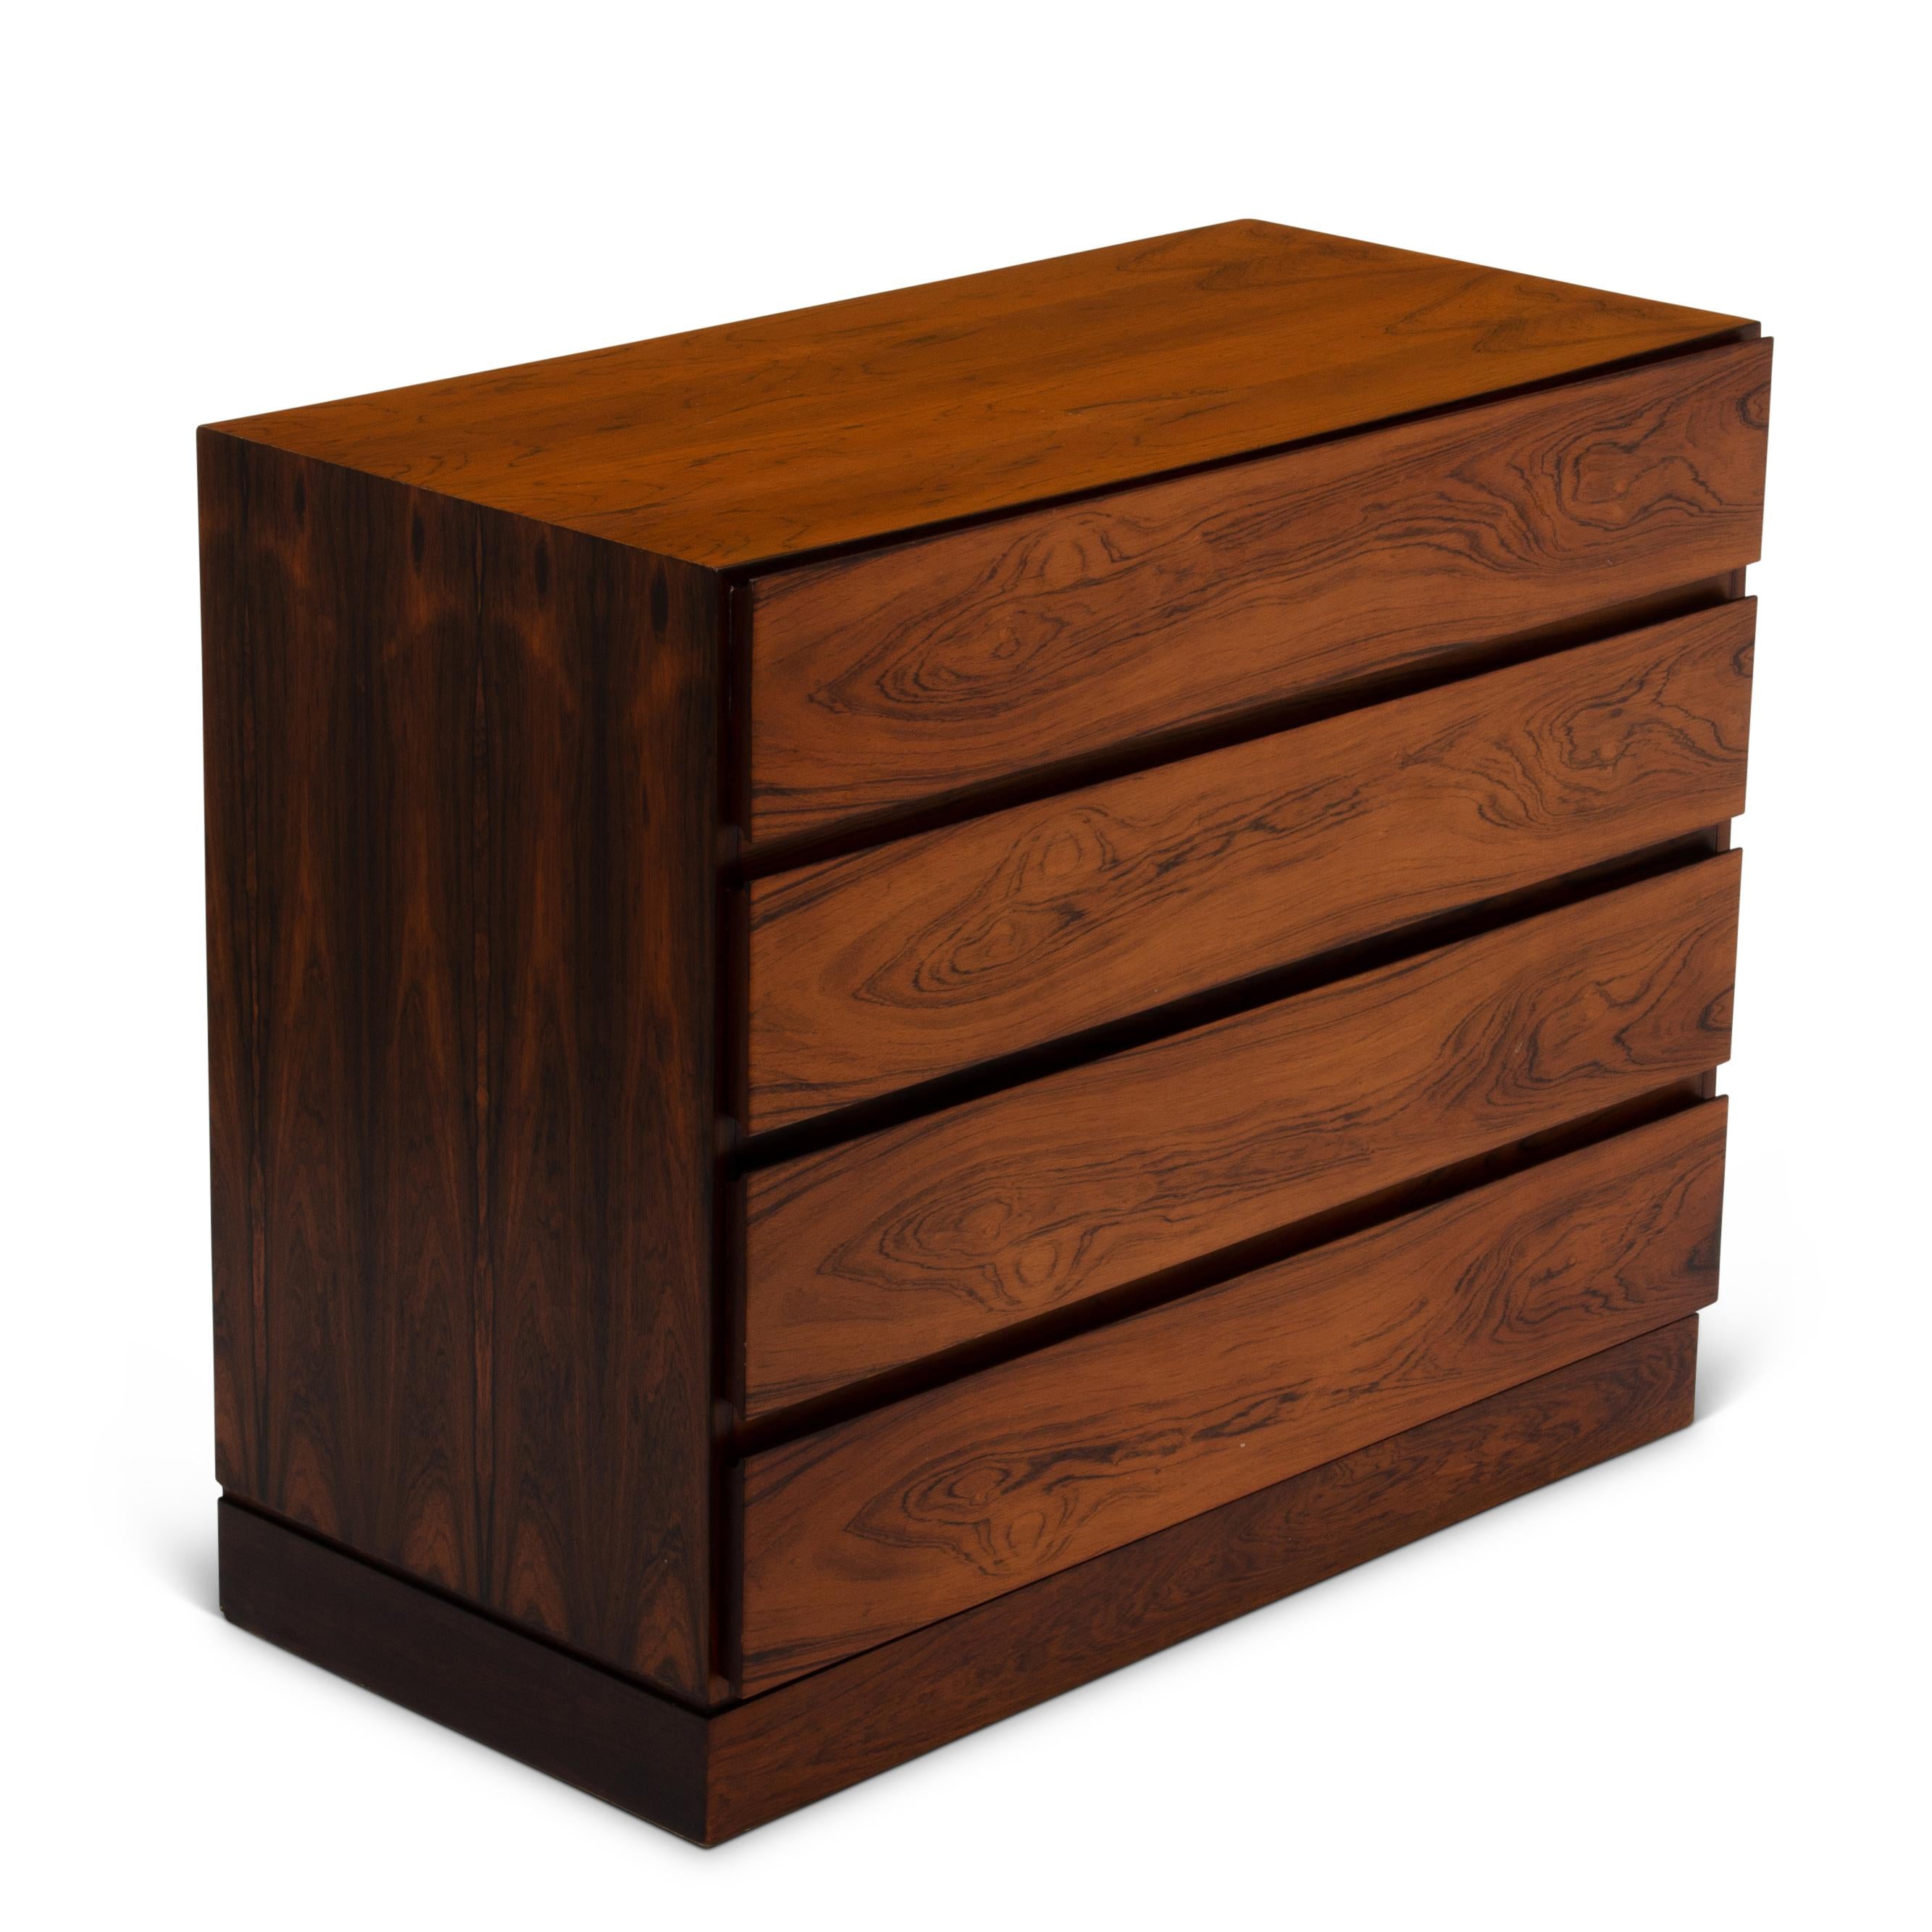 A midcentury Danish Arne Wahl Iversen for Vinde Møbelfabrik model 121 midcentury bachelor's chest or lowboy dresser. What is unique about this piece is that the sides and front of the case are in a dark Brazilian rosewood while the drawer fronts and